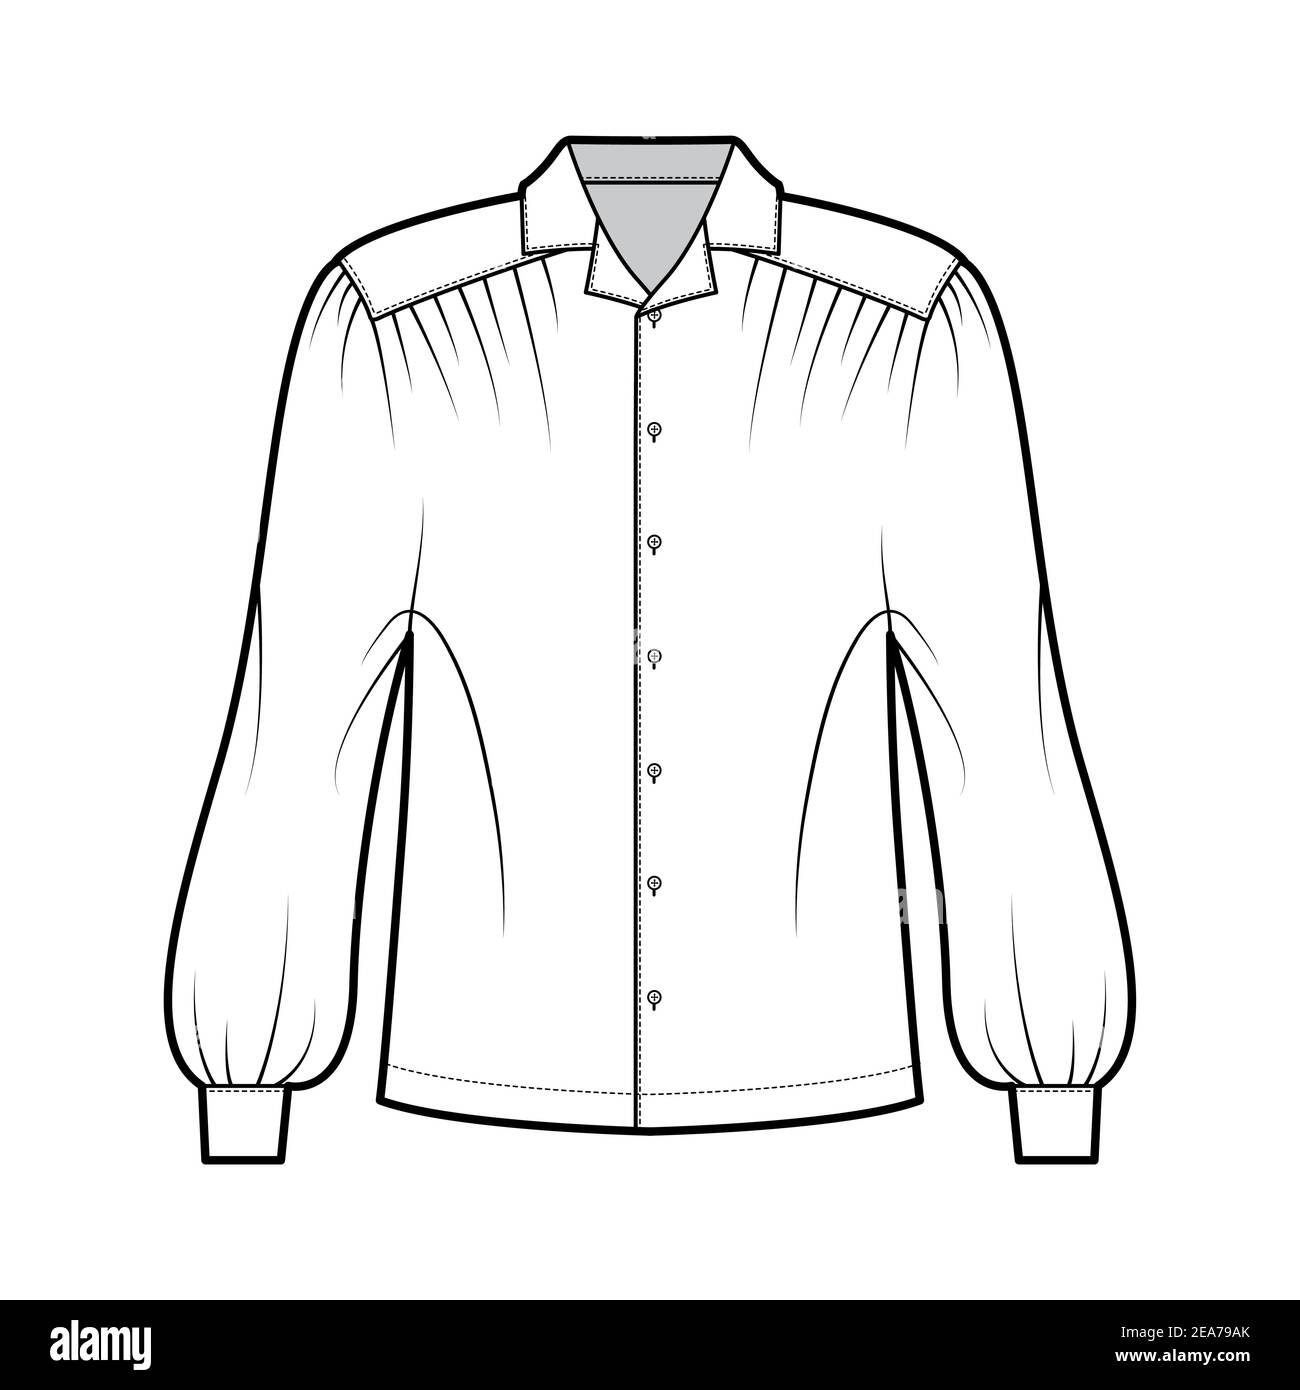 Open blouse Stock Vector Images - Alamy